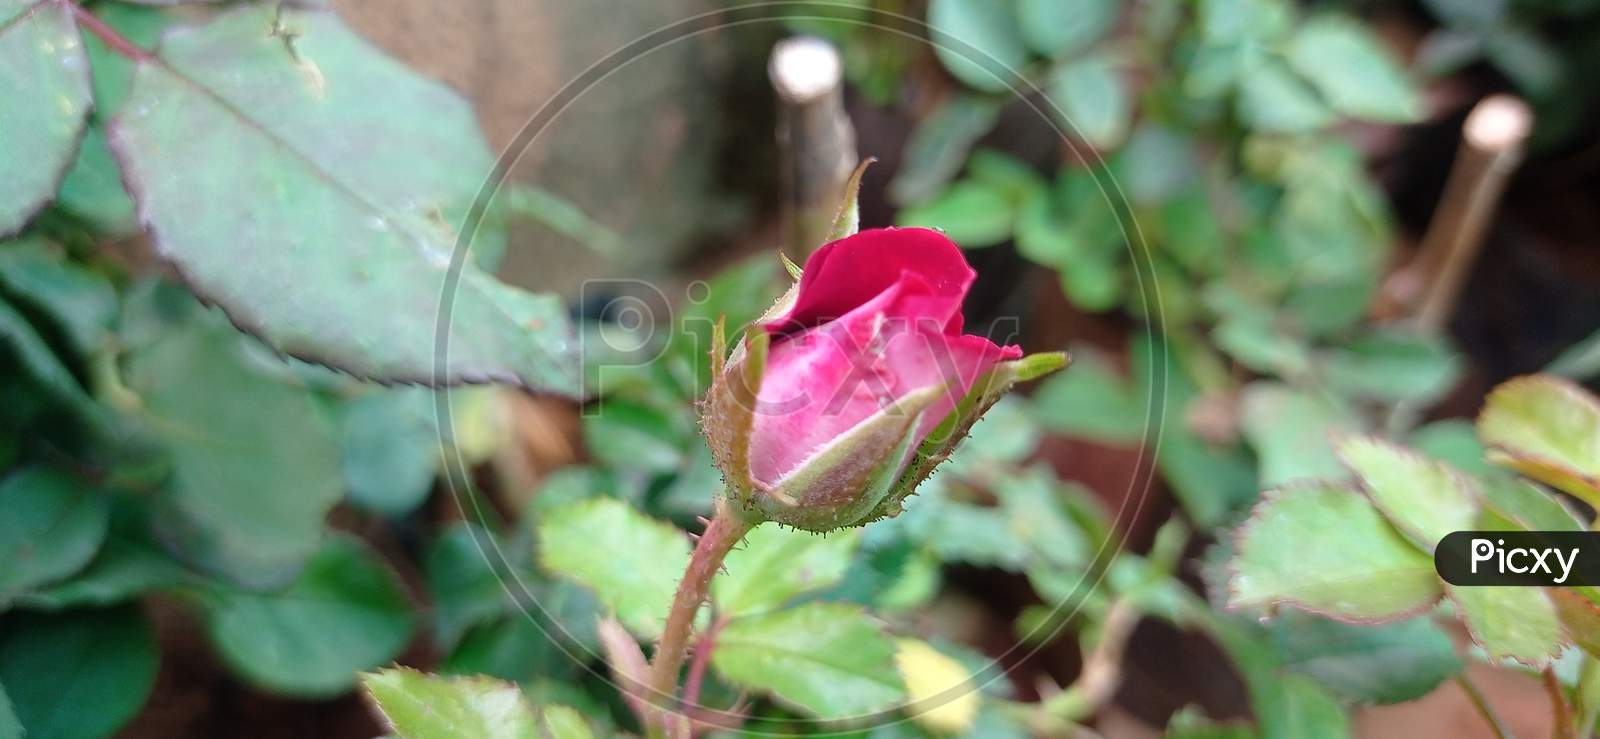 The red rose sprout on the garden